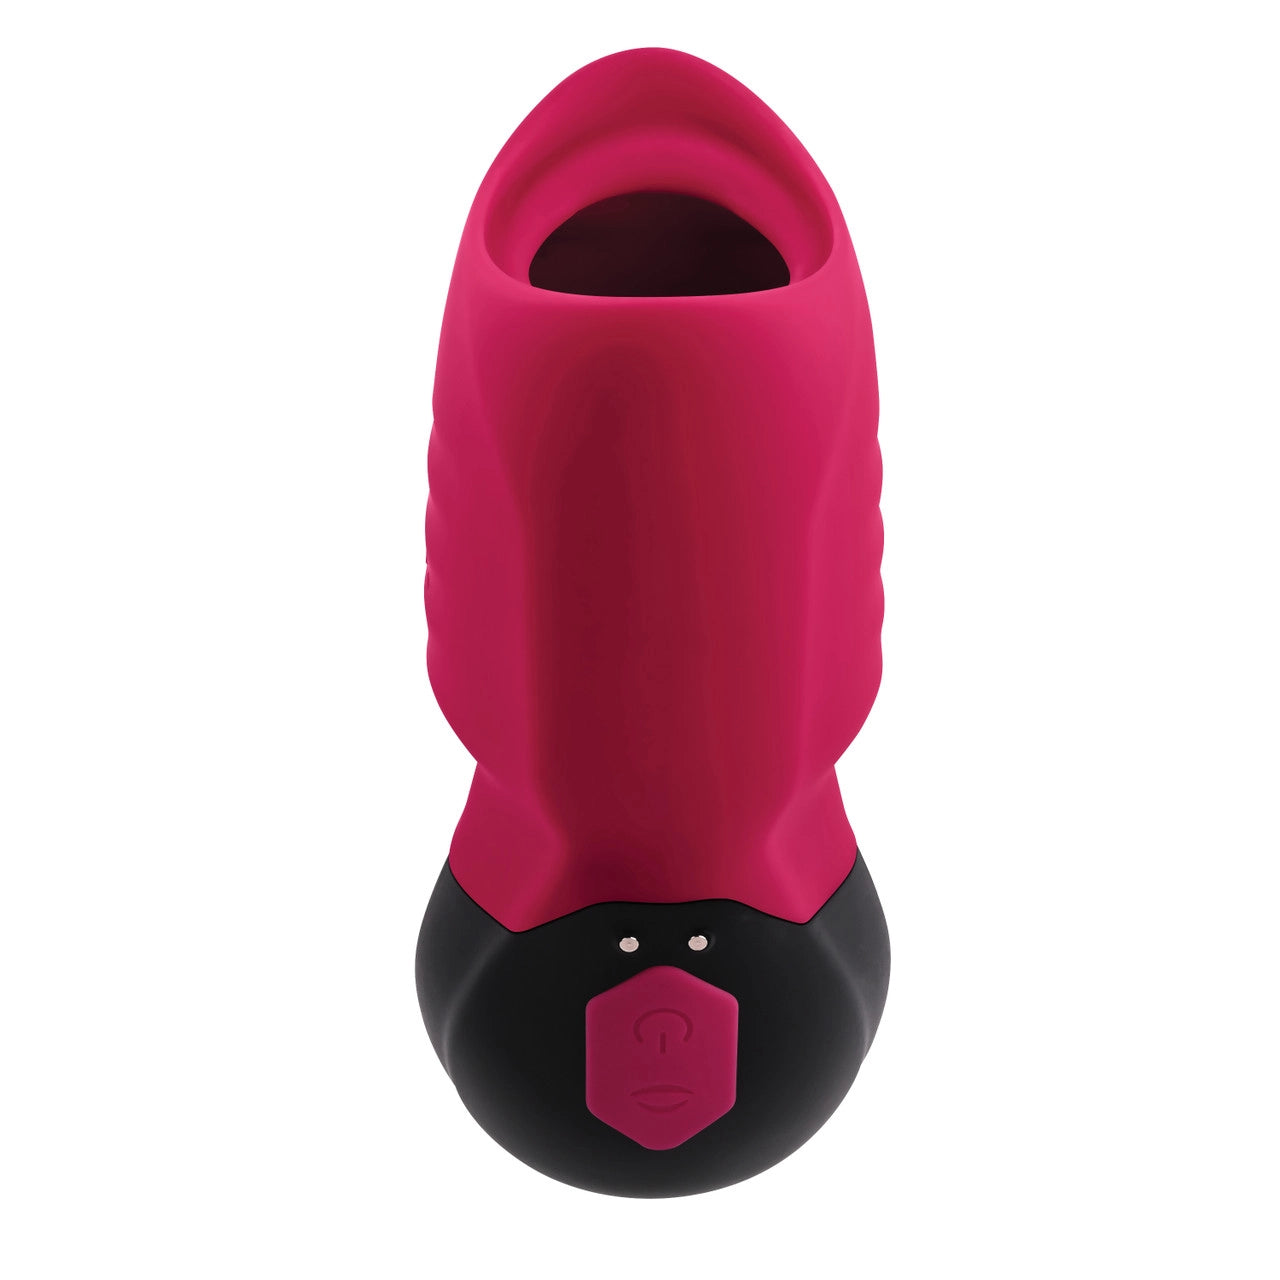 The front of the Body Kisses Vibrating Suction Massager.